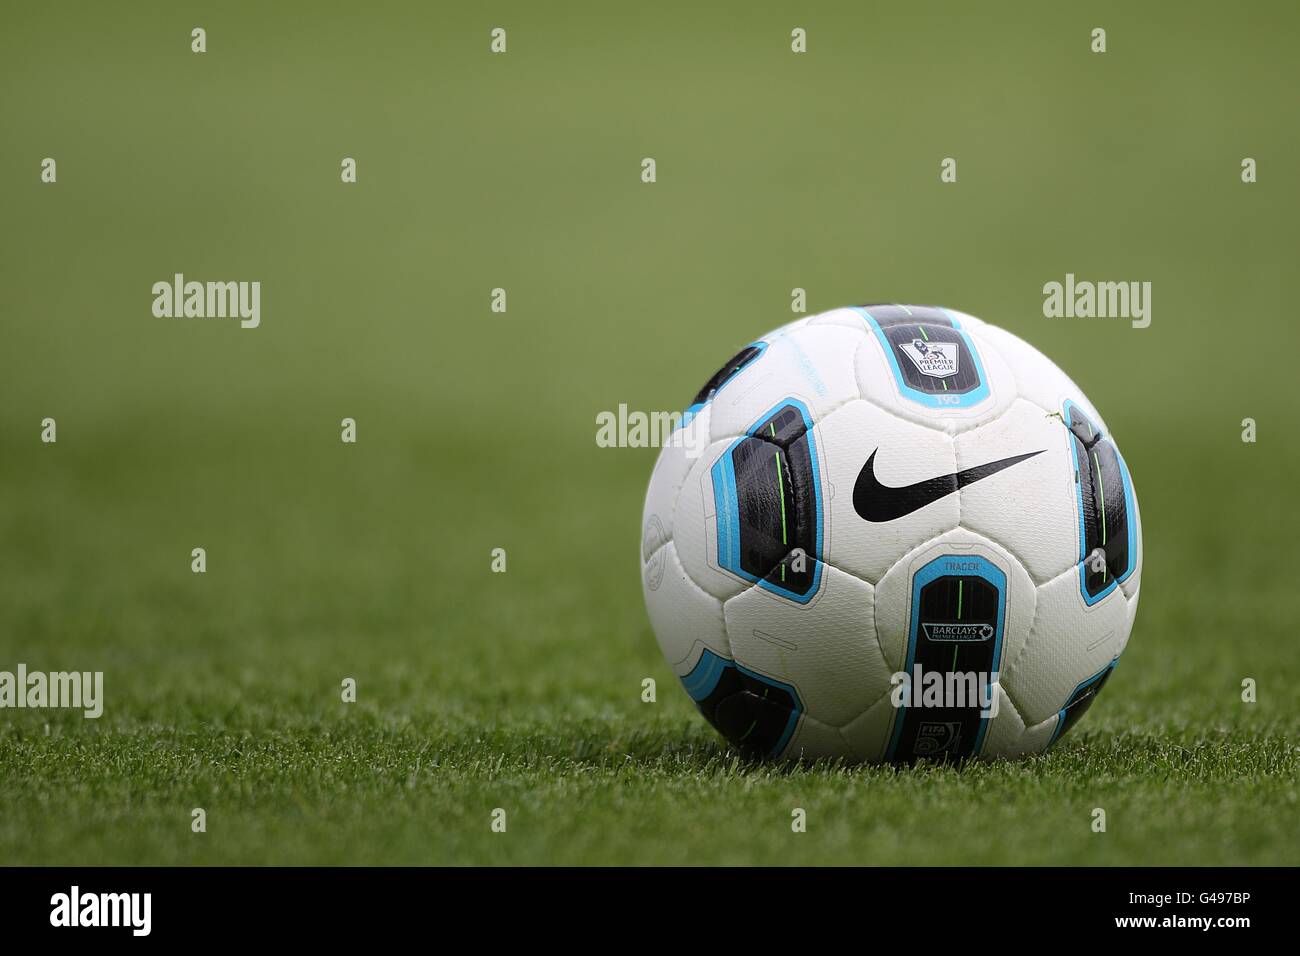 The Nike T90 Tracer ball, the official matchball for the Barclays Premier League Stock Photo